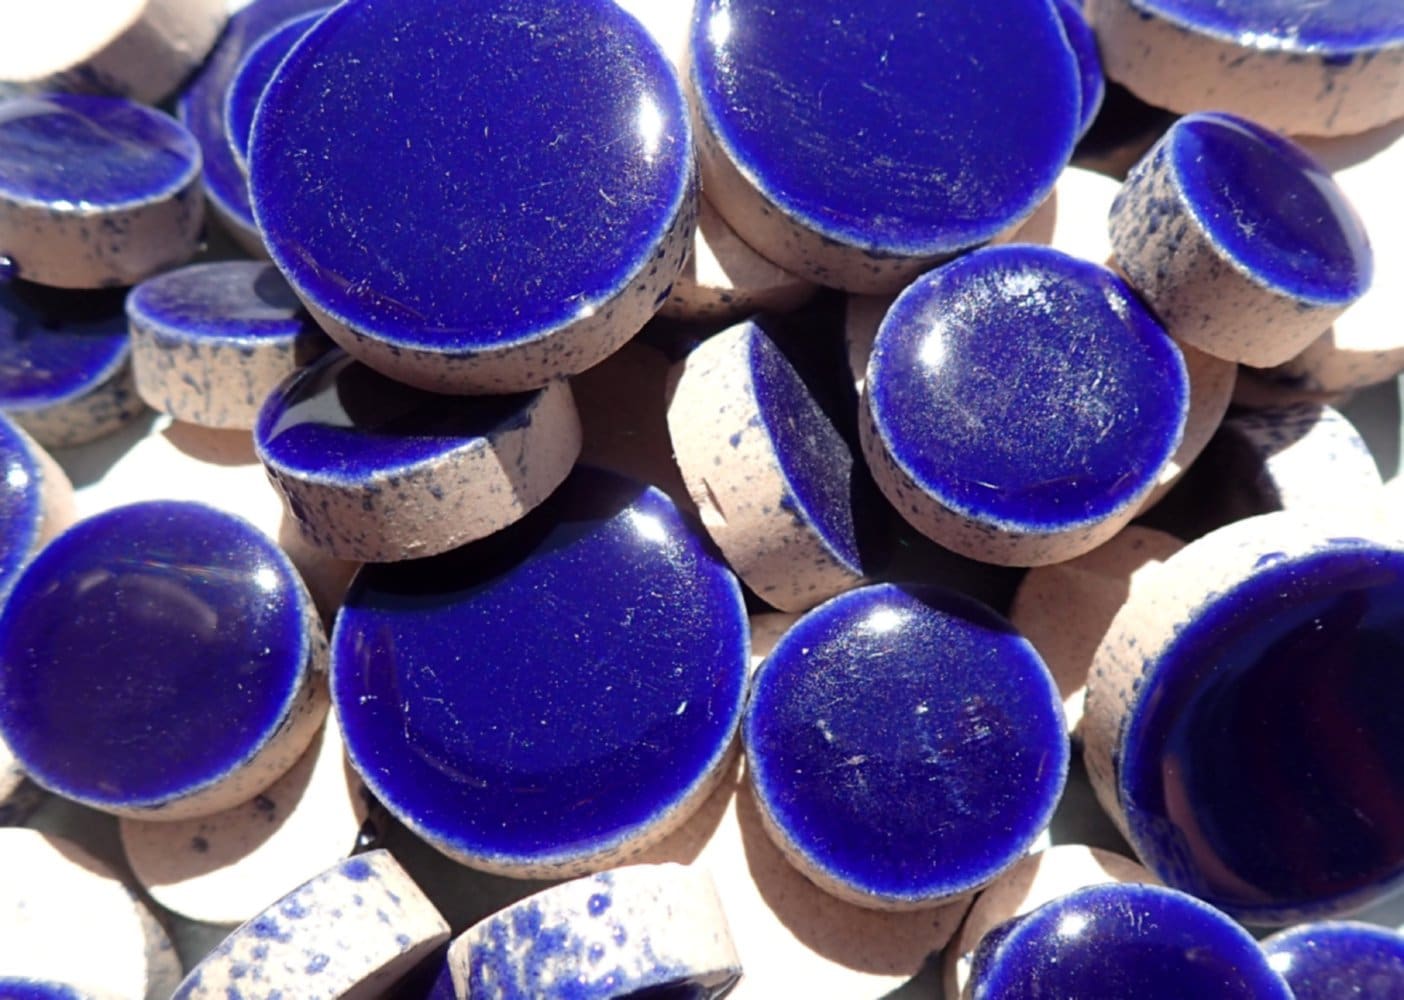 Dark Blue Circles Mosaic Tiles - 50g Ceramic in Mix of 3 Sizes 1/2" and 3/4" and 5/8" in Indigo